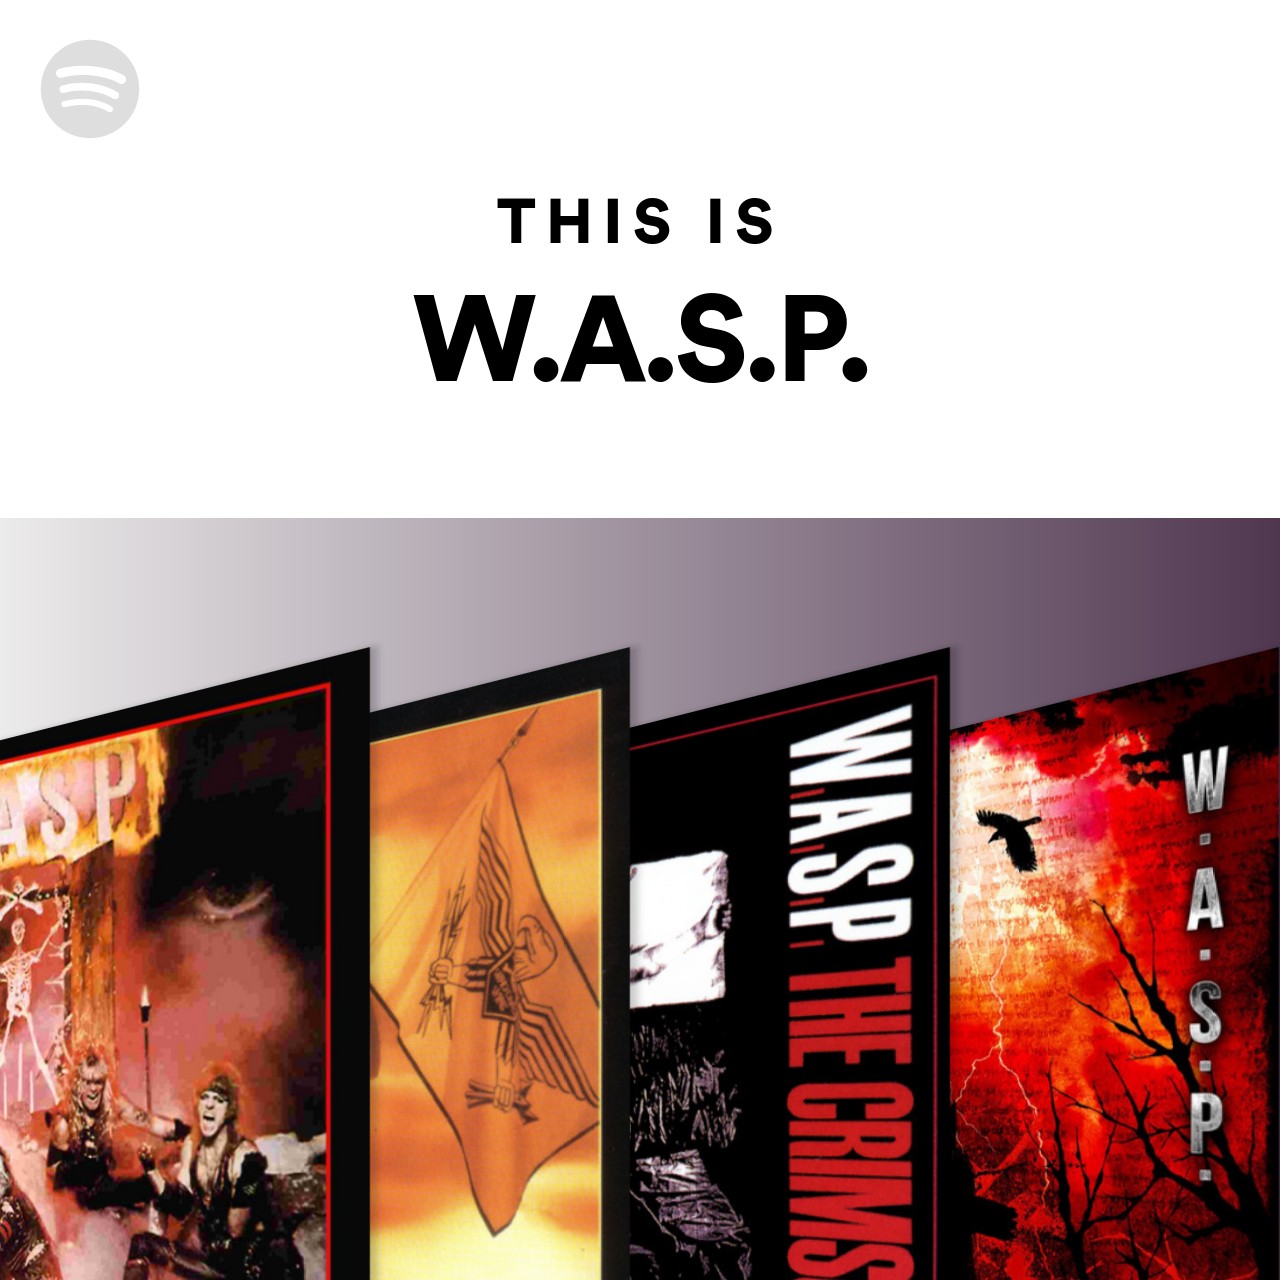 This Is W.A.S.P.